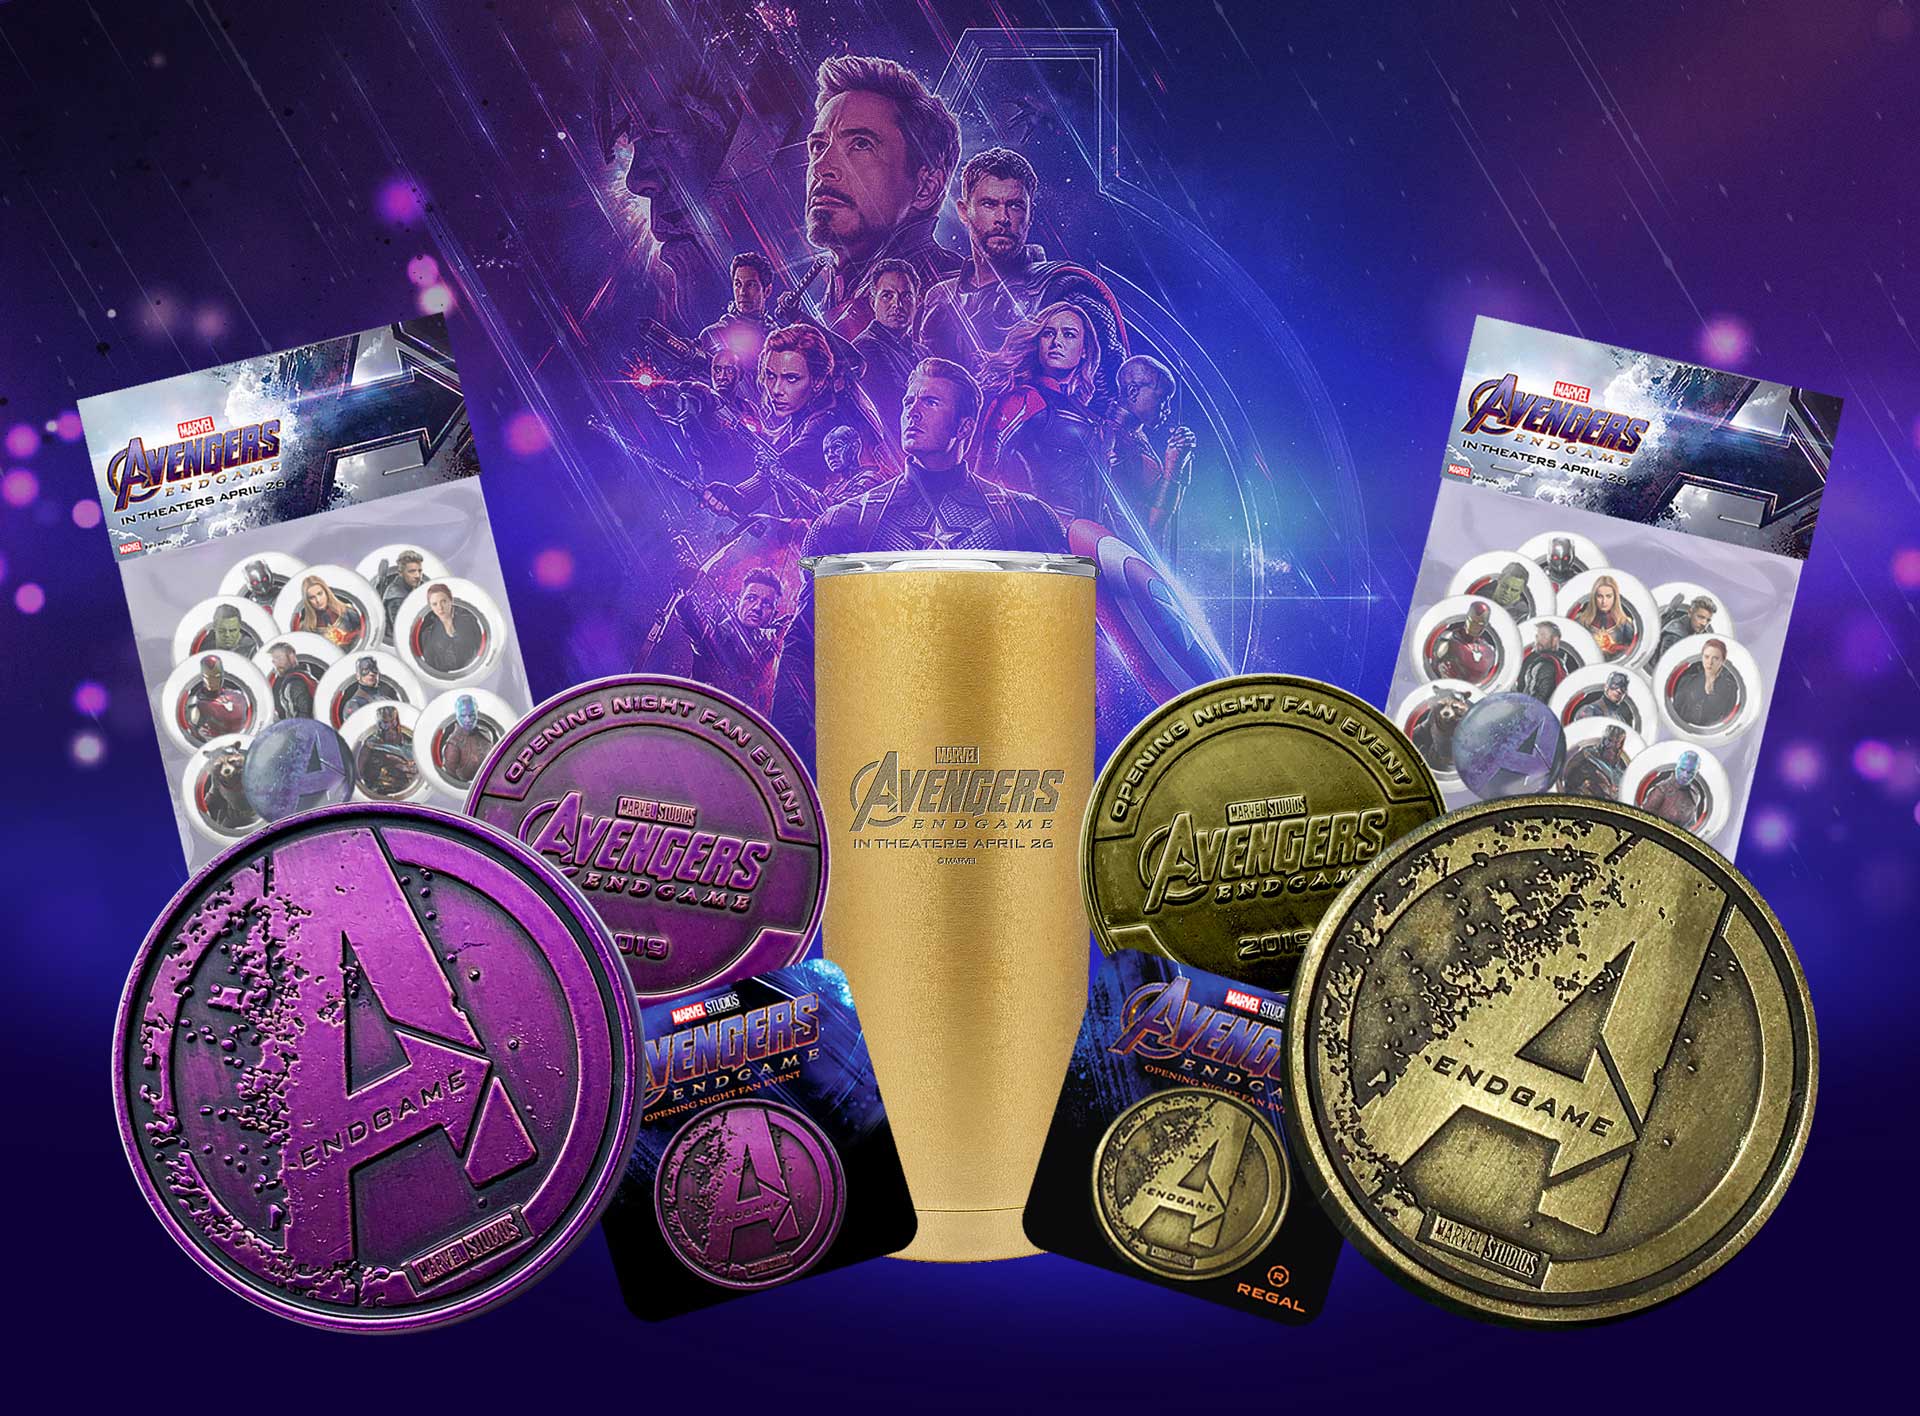 New World Group Marvel Avengers endgame premium coins, stickers and movie promo items